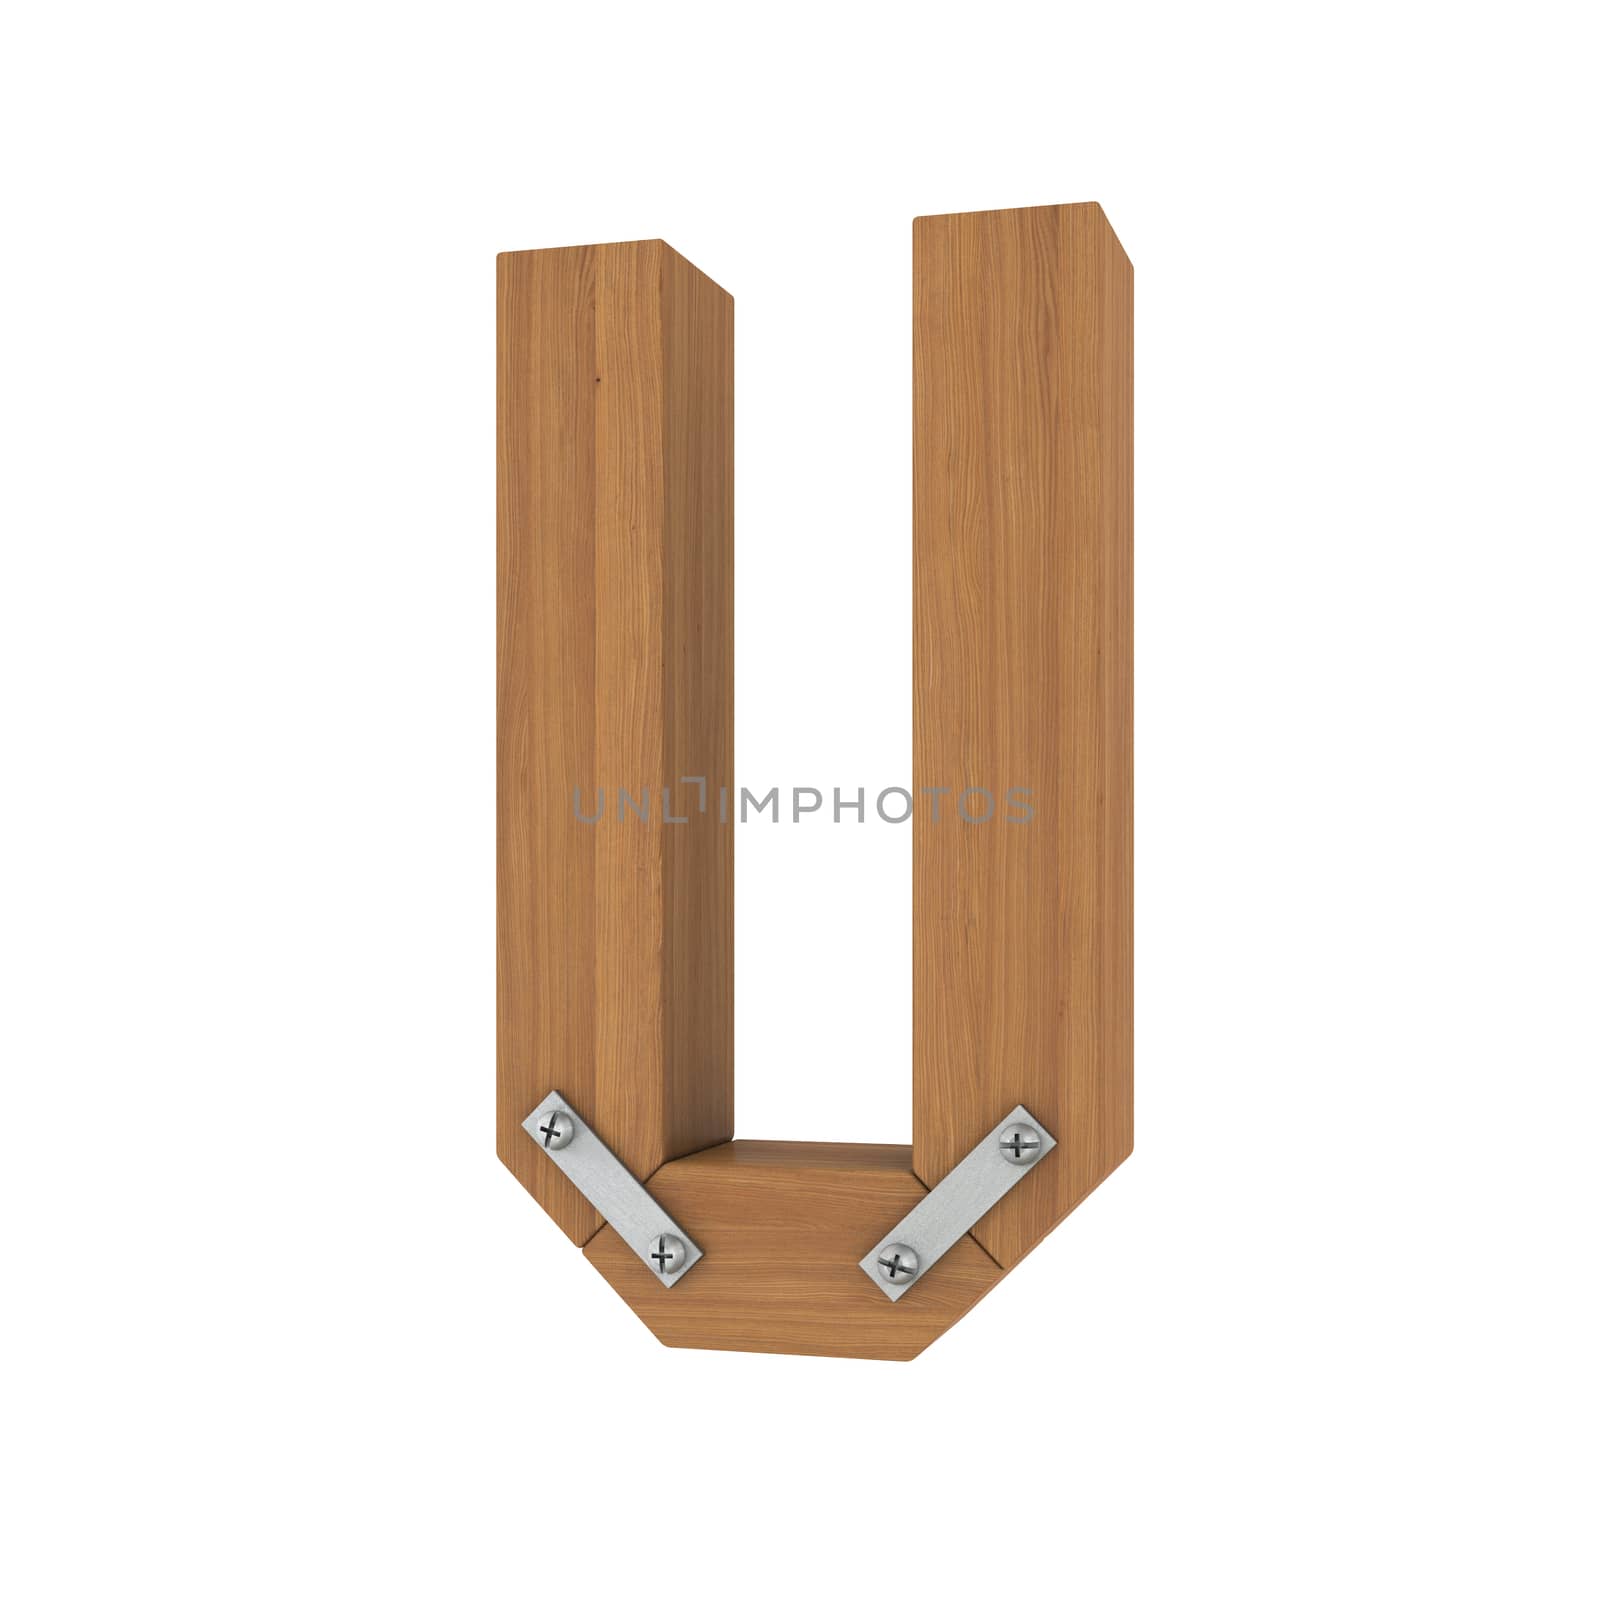 Wooden letter U. Isolated render on a white background